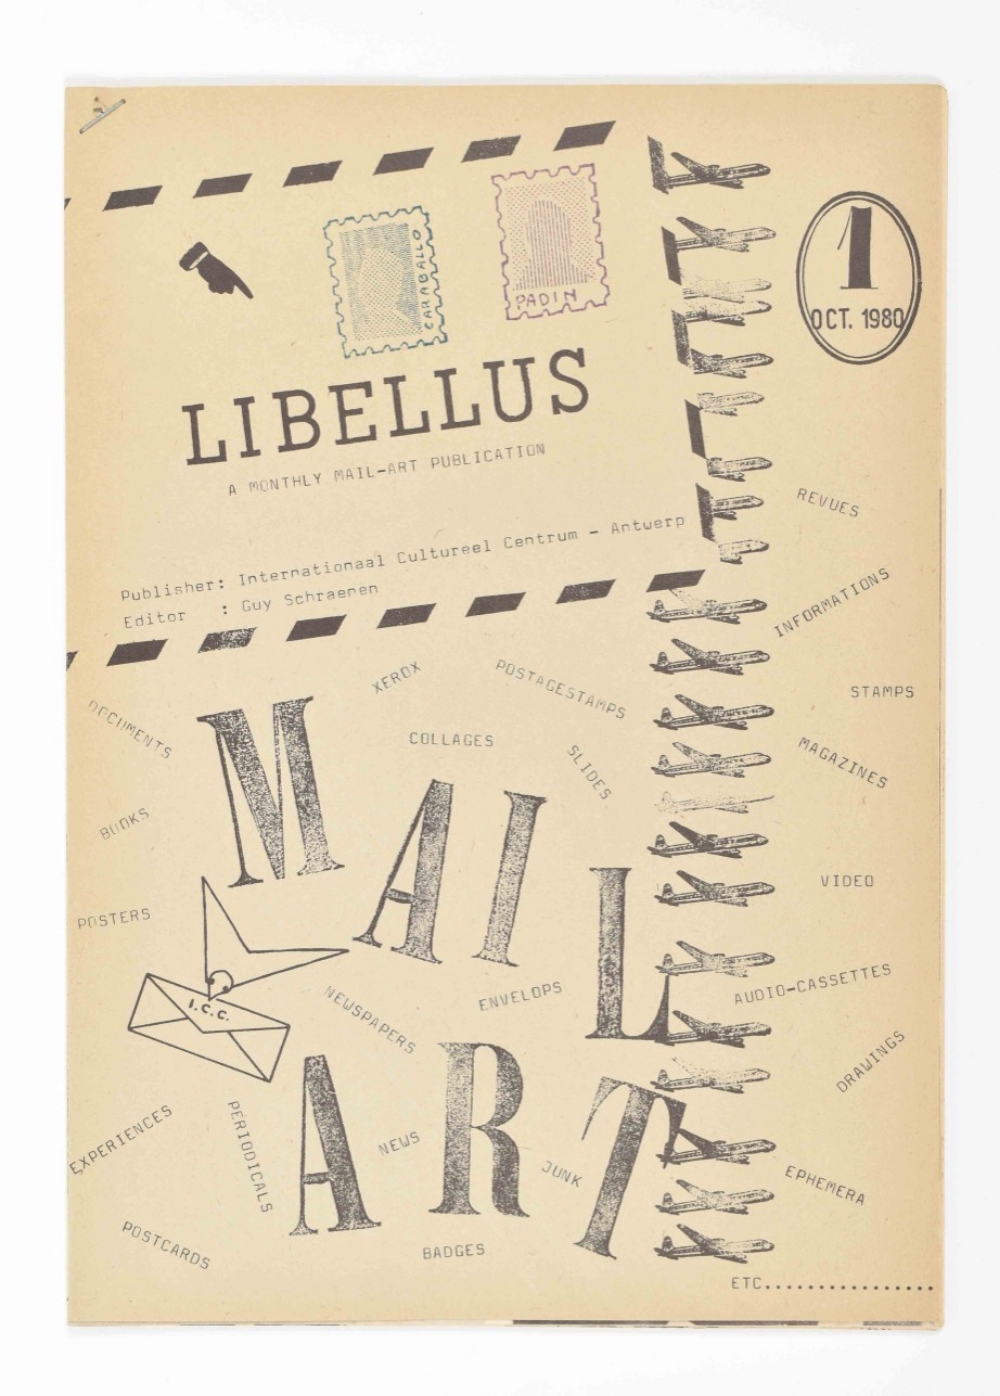 Guy Schraenen, Libellus, A monthly mail-art publication. Complete run Nos.1-12 - Image 2 of 8